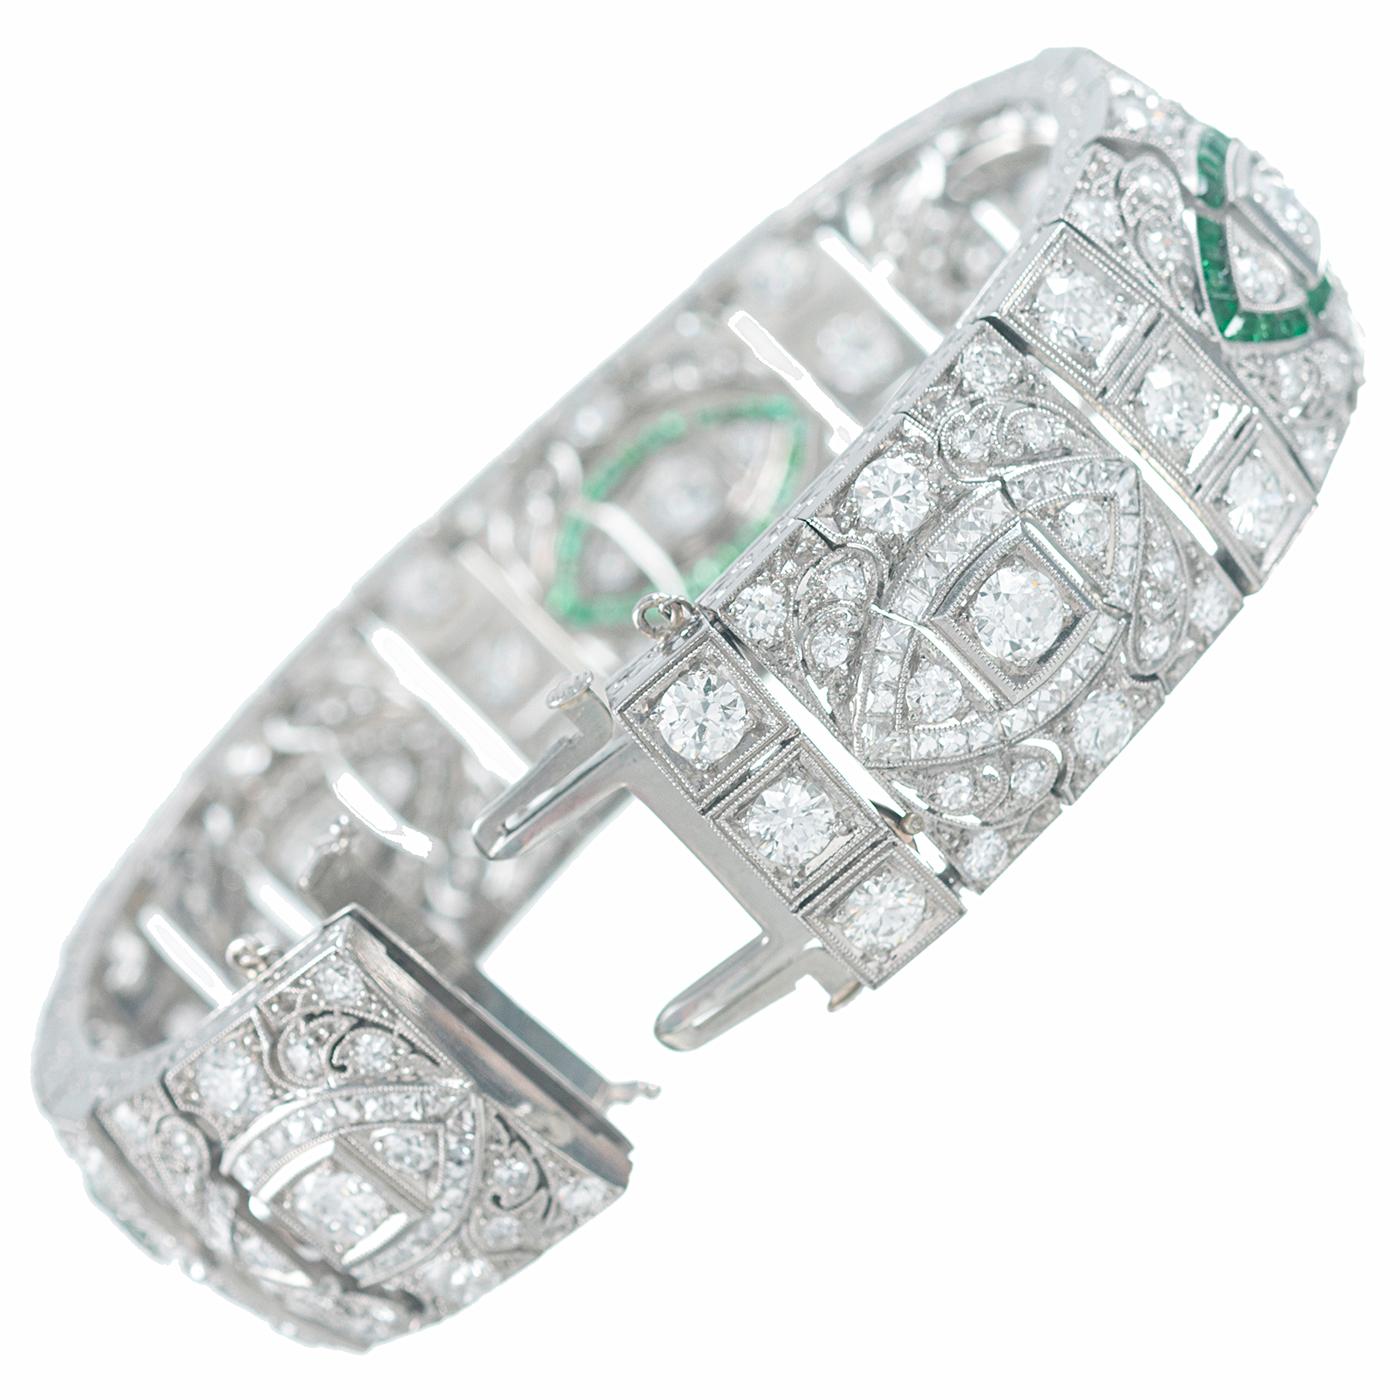 An exceptional example of art deco splendor, this platinum bracelet is adorned with 20 carats of diamonds and accented with marquis-shaped emerald accents. The seven centerpieces of the design resemble eyes and will mesmerize you as you allow your